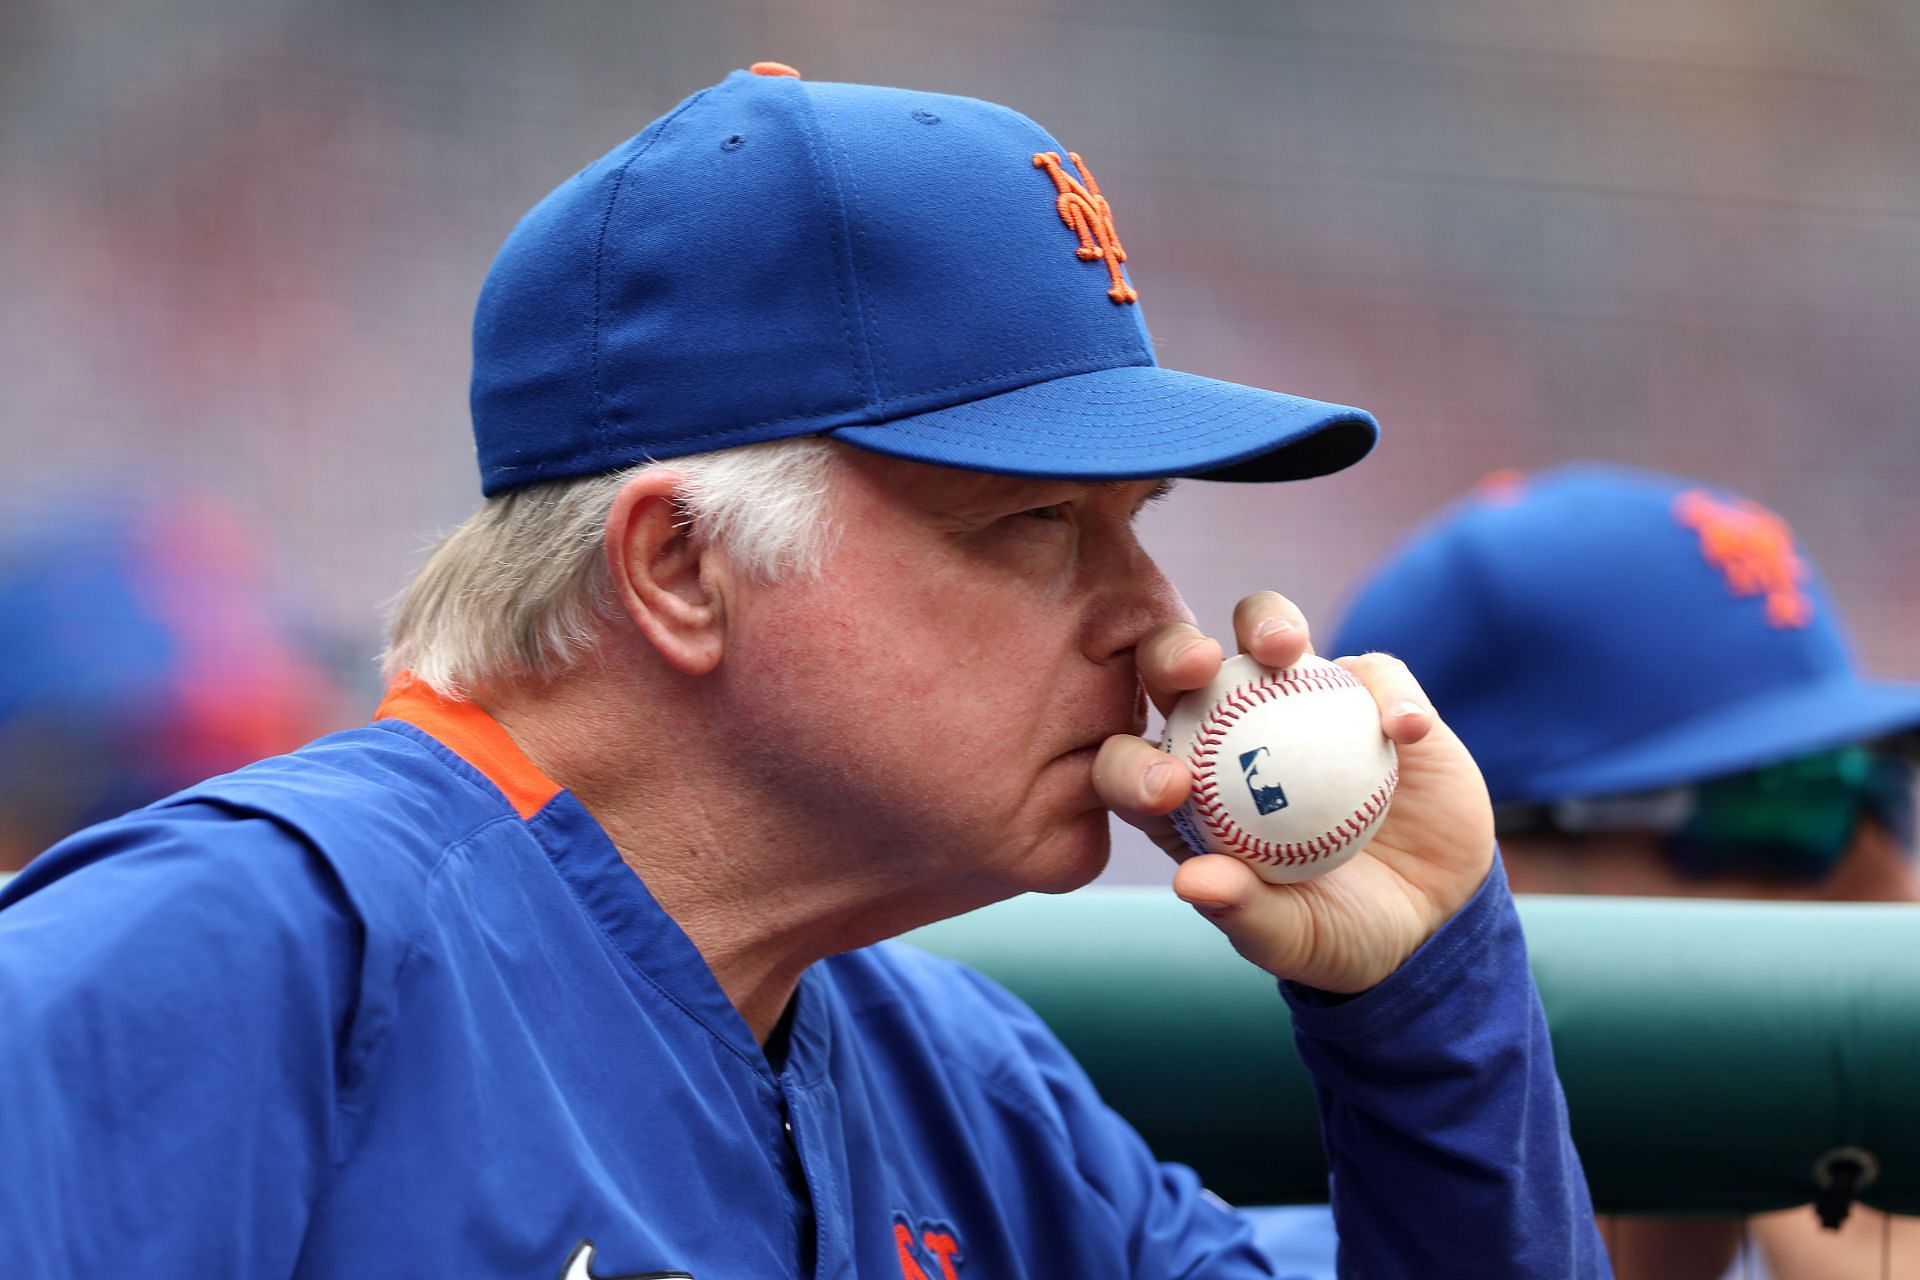 Buck Showalter is in his first season as the New York Mets manager